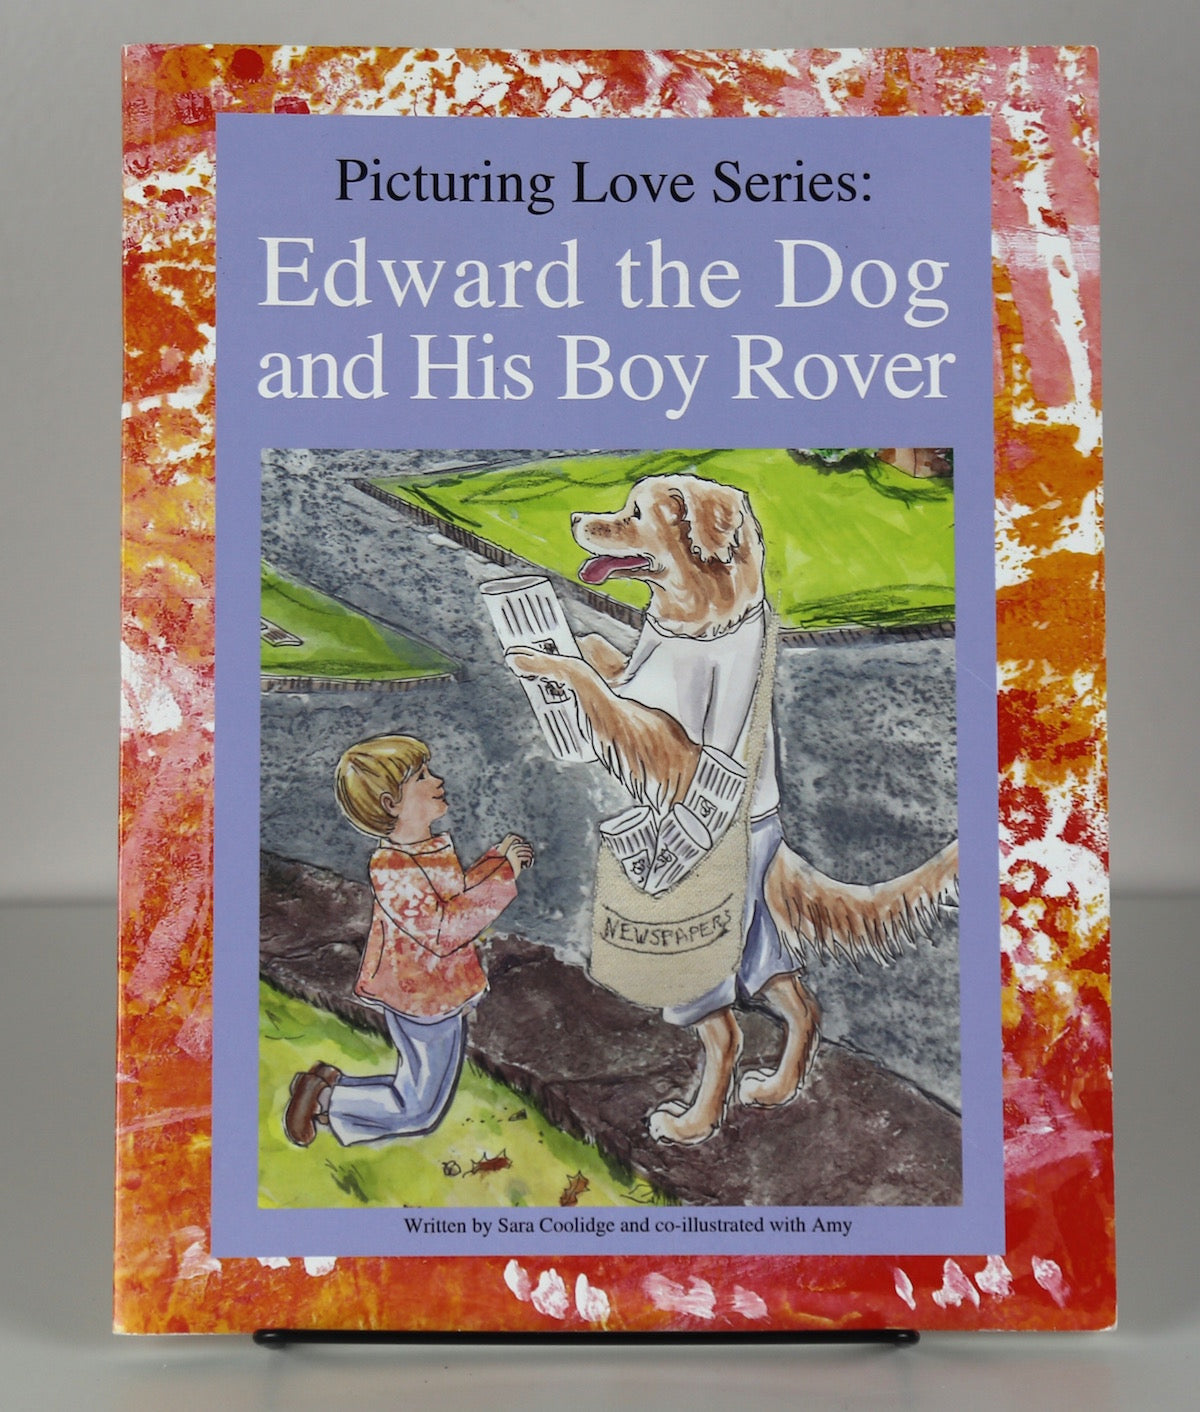 Edward the Dog and His Boy Rover Book